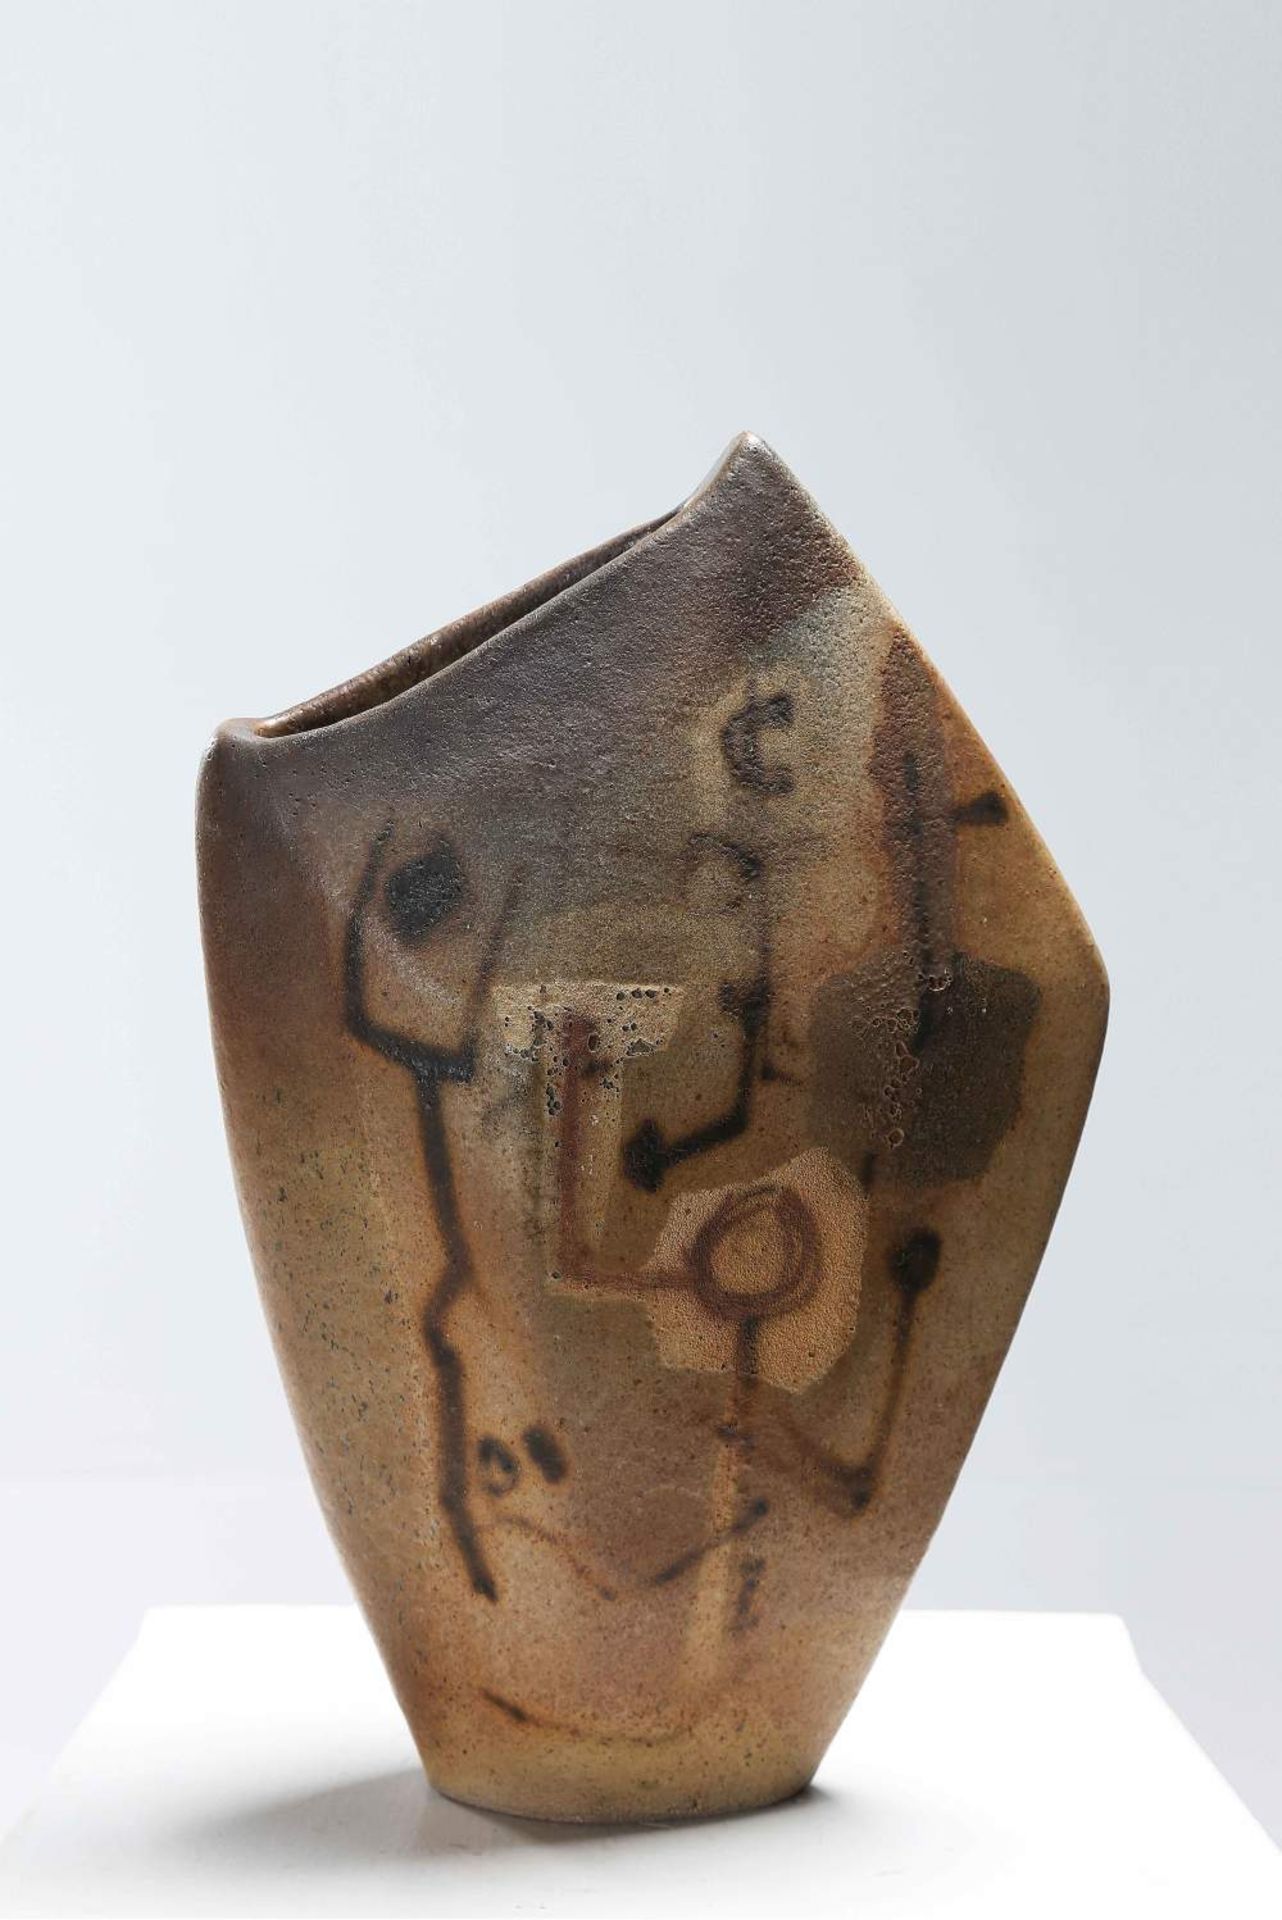 SASSI IVO (n. 1937)
Impressive sculpture vase decorated with motifs of Italian abstraction from